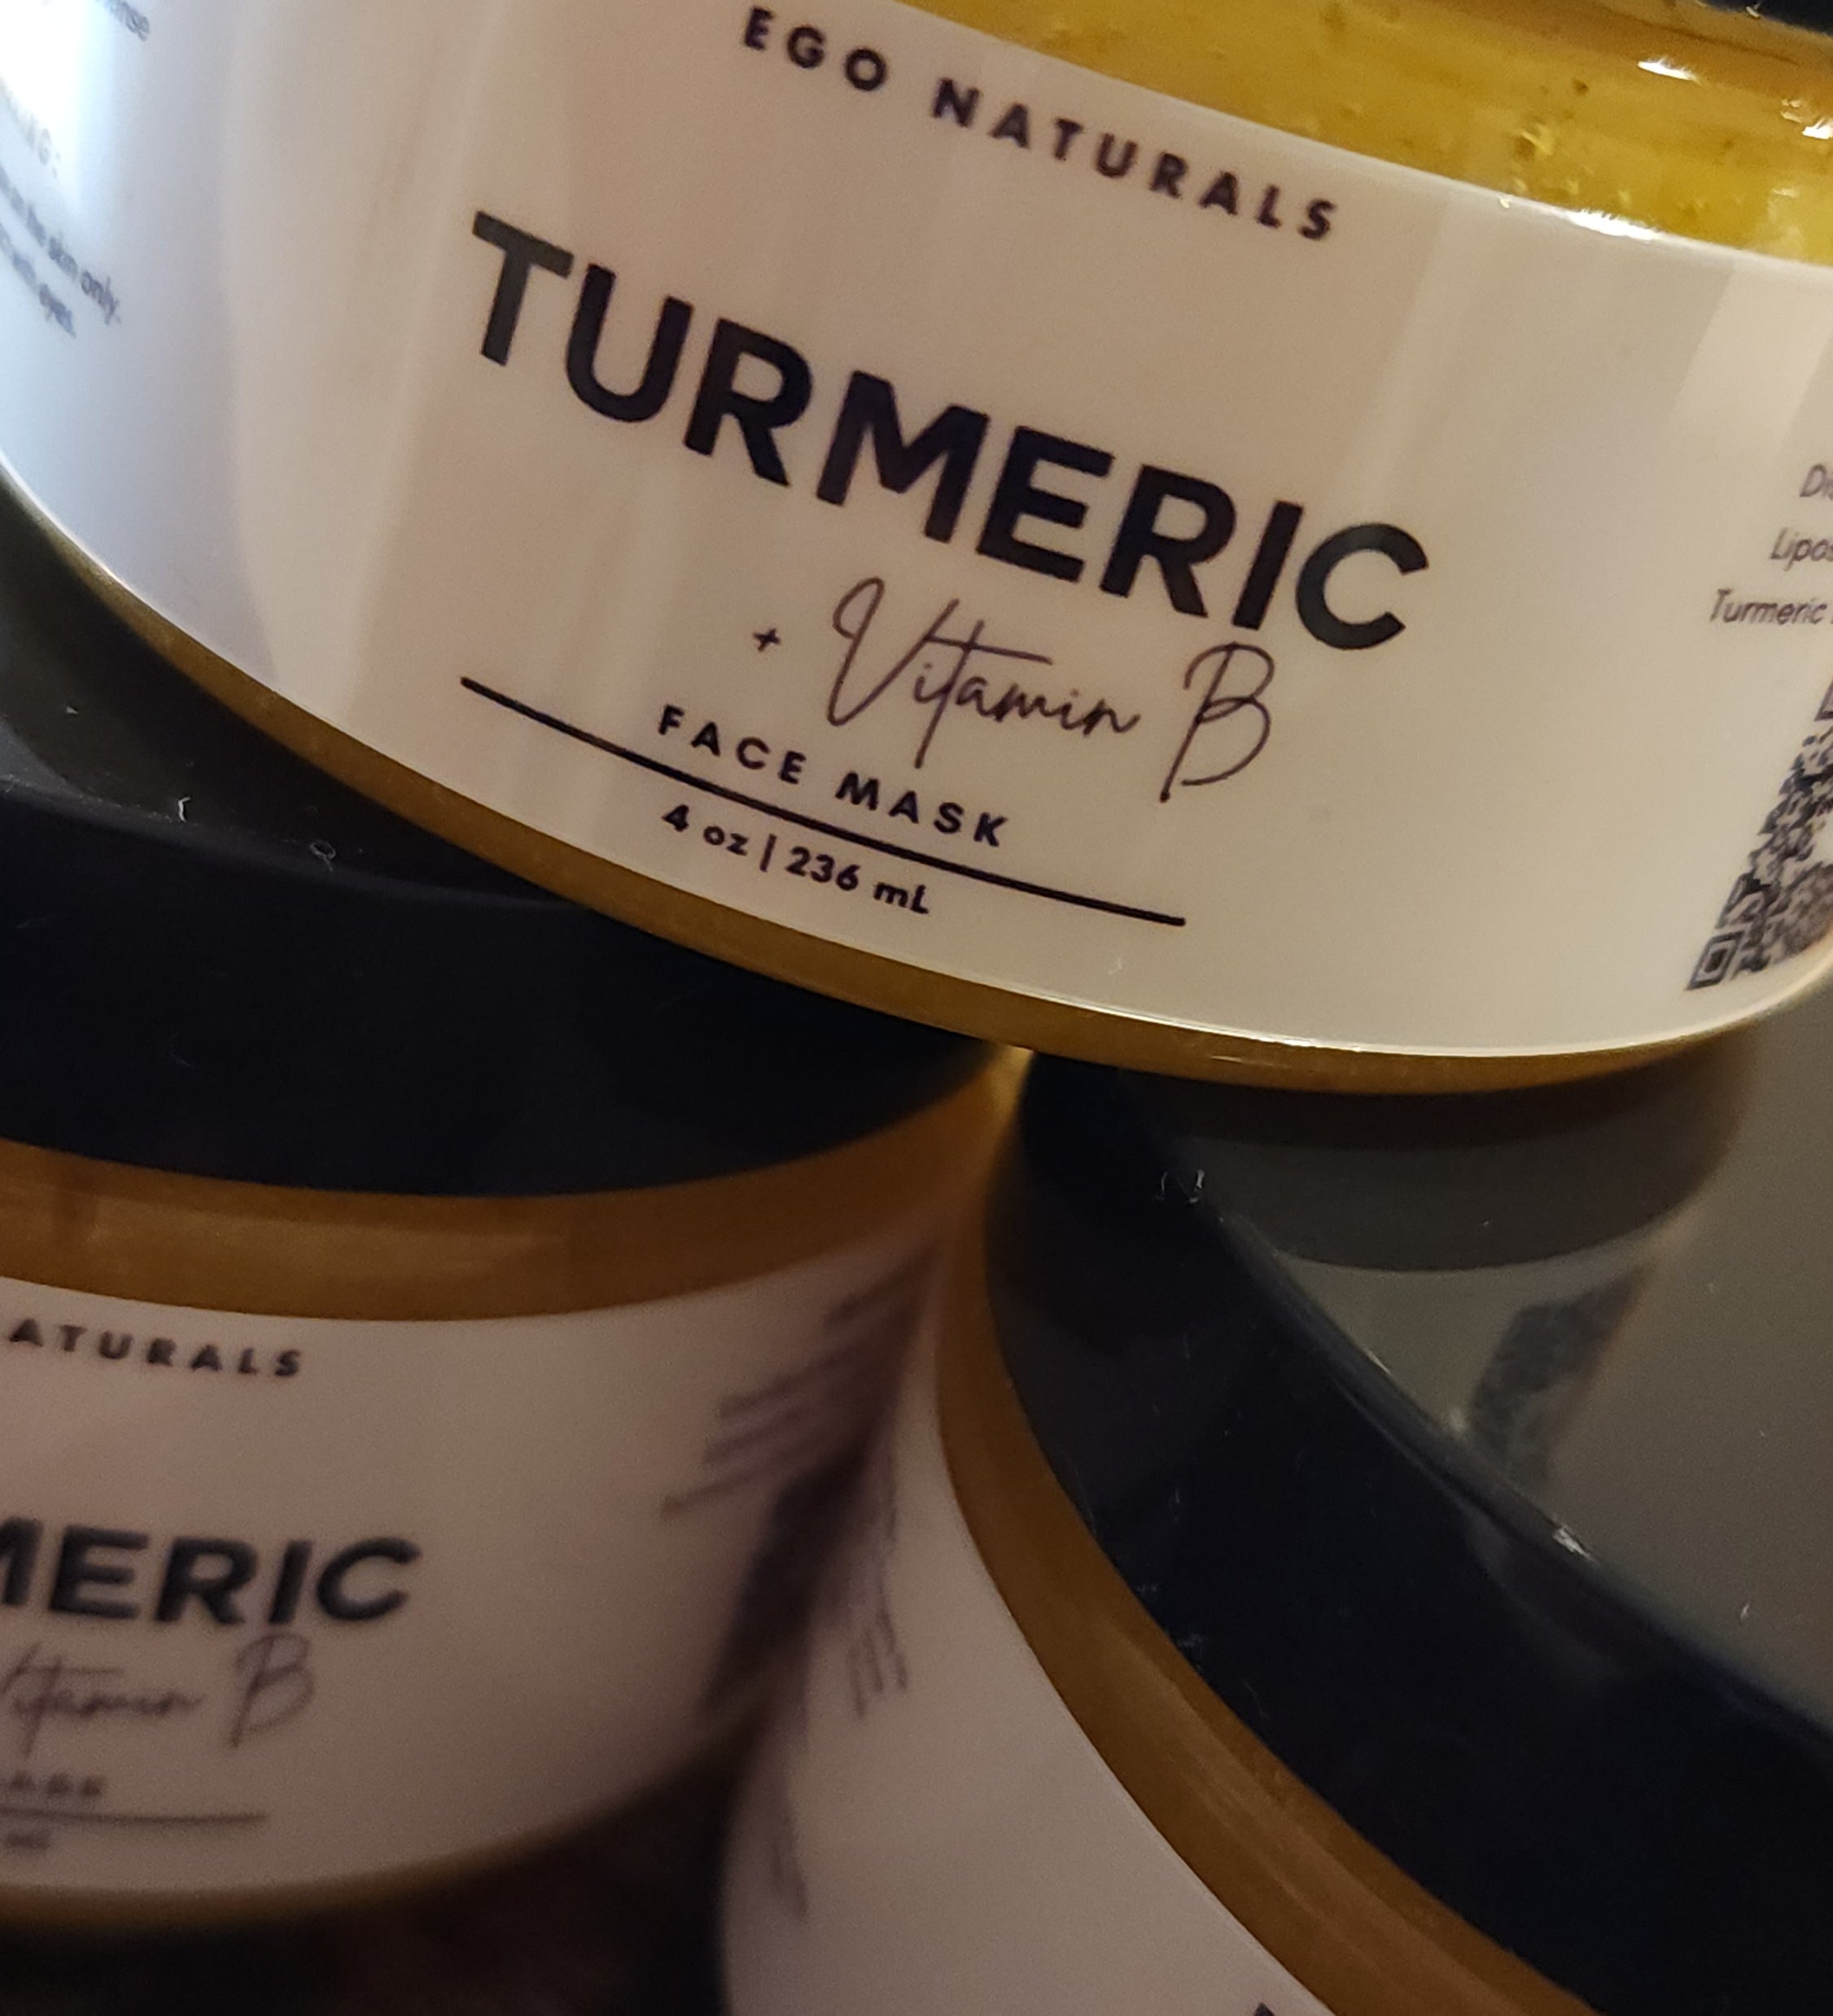 Turmeric Jelly Mask - Ego Naturals